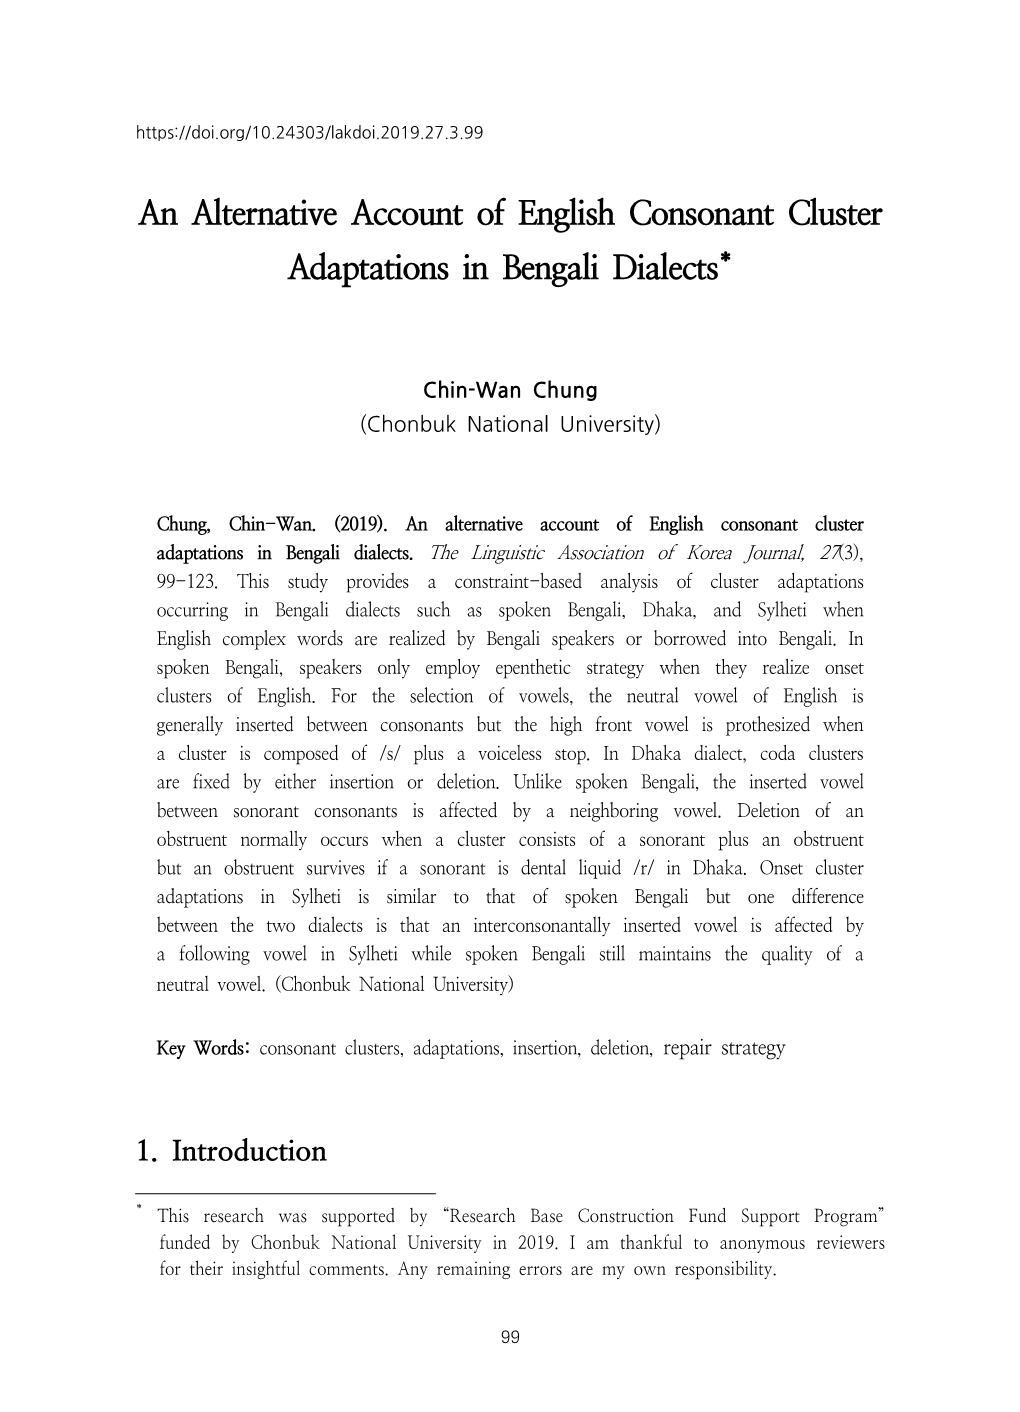 An Alternative Account of English Consonant Cluster Adaptations in Bengali Dialects*